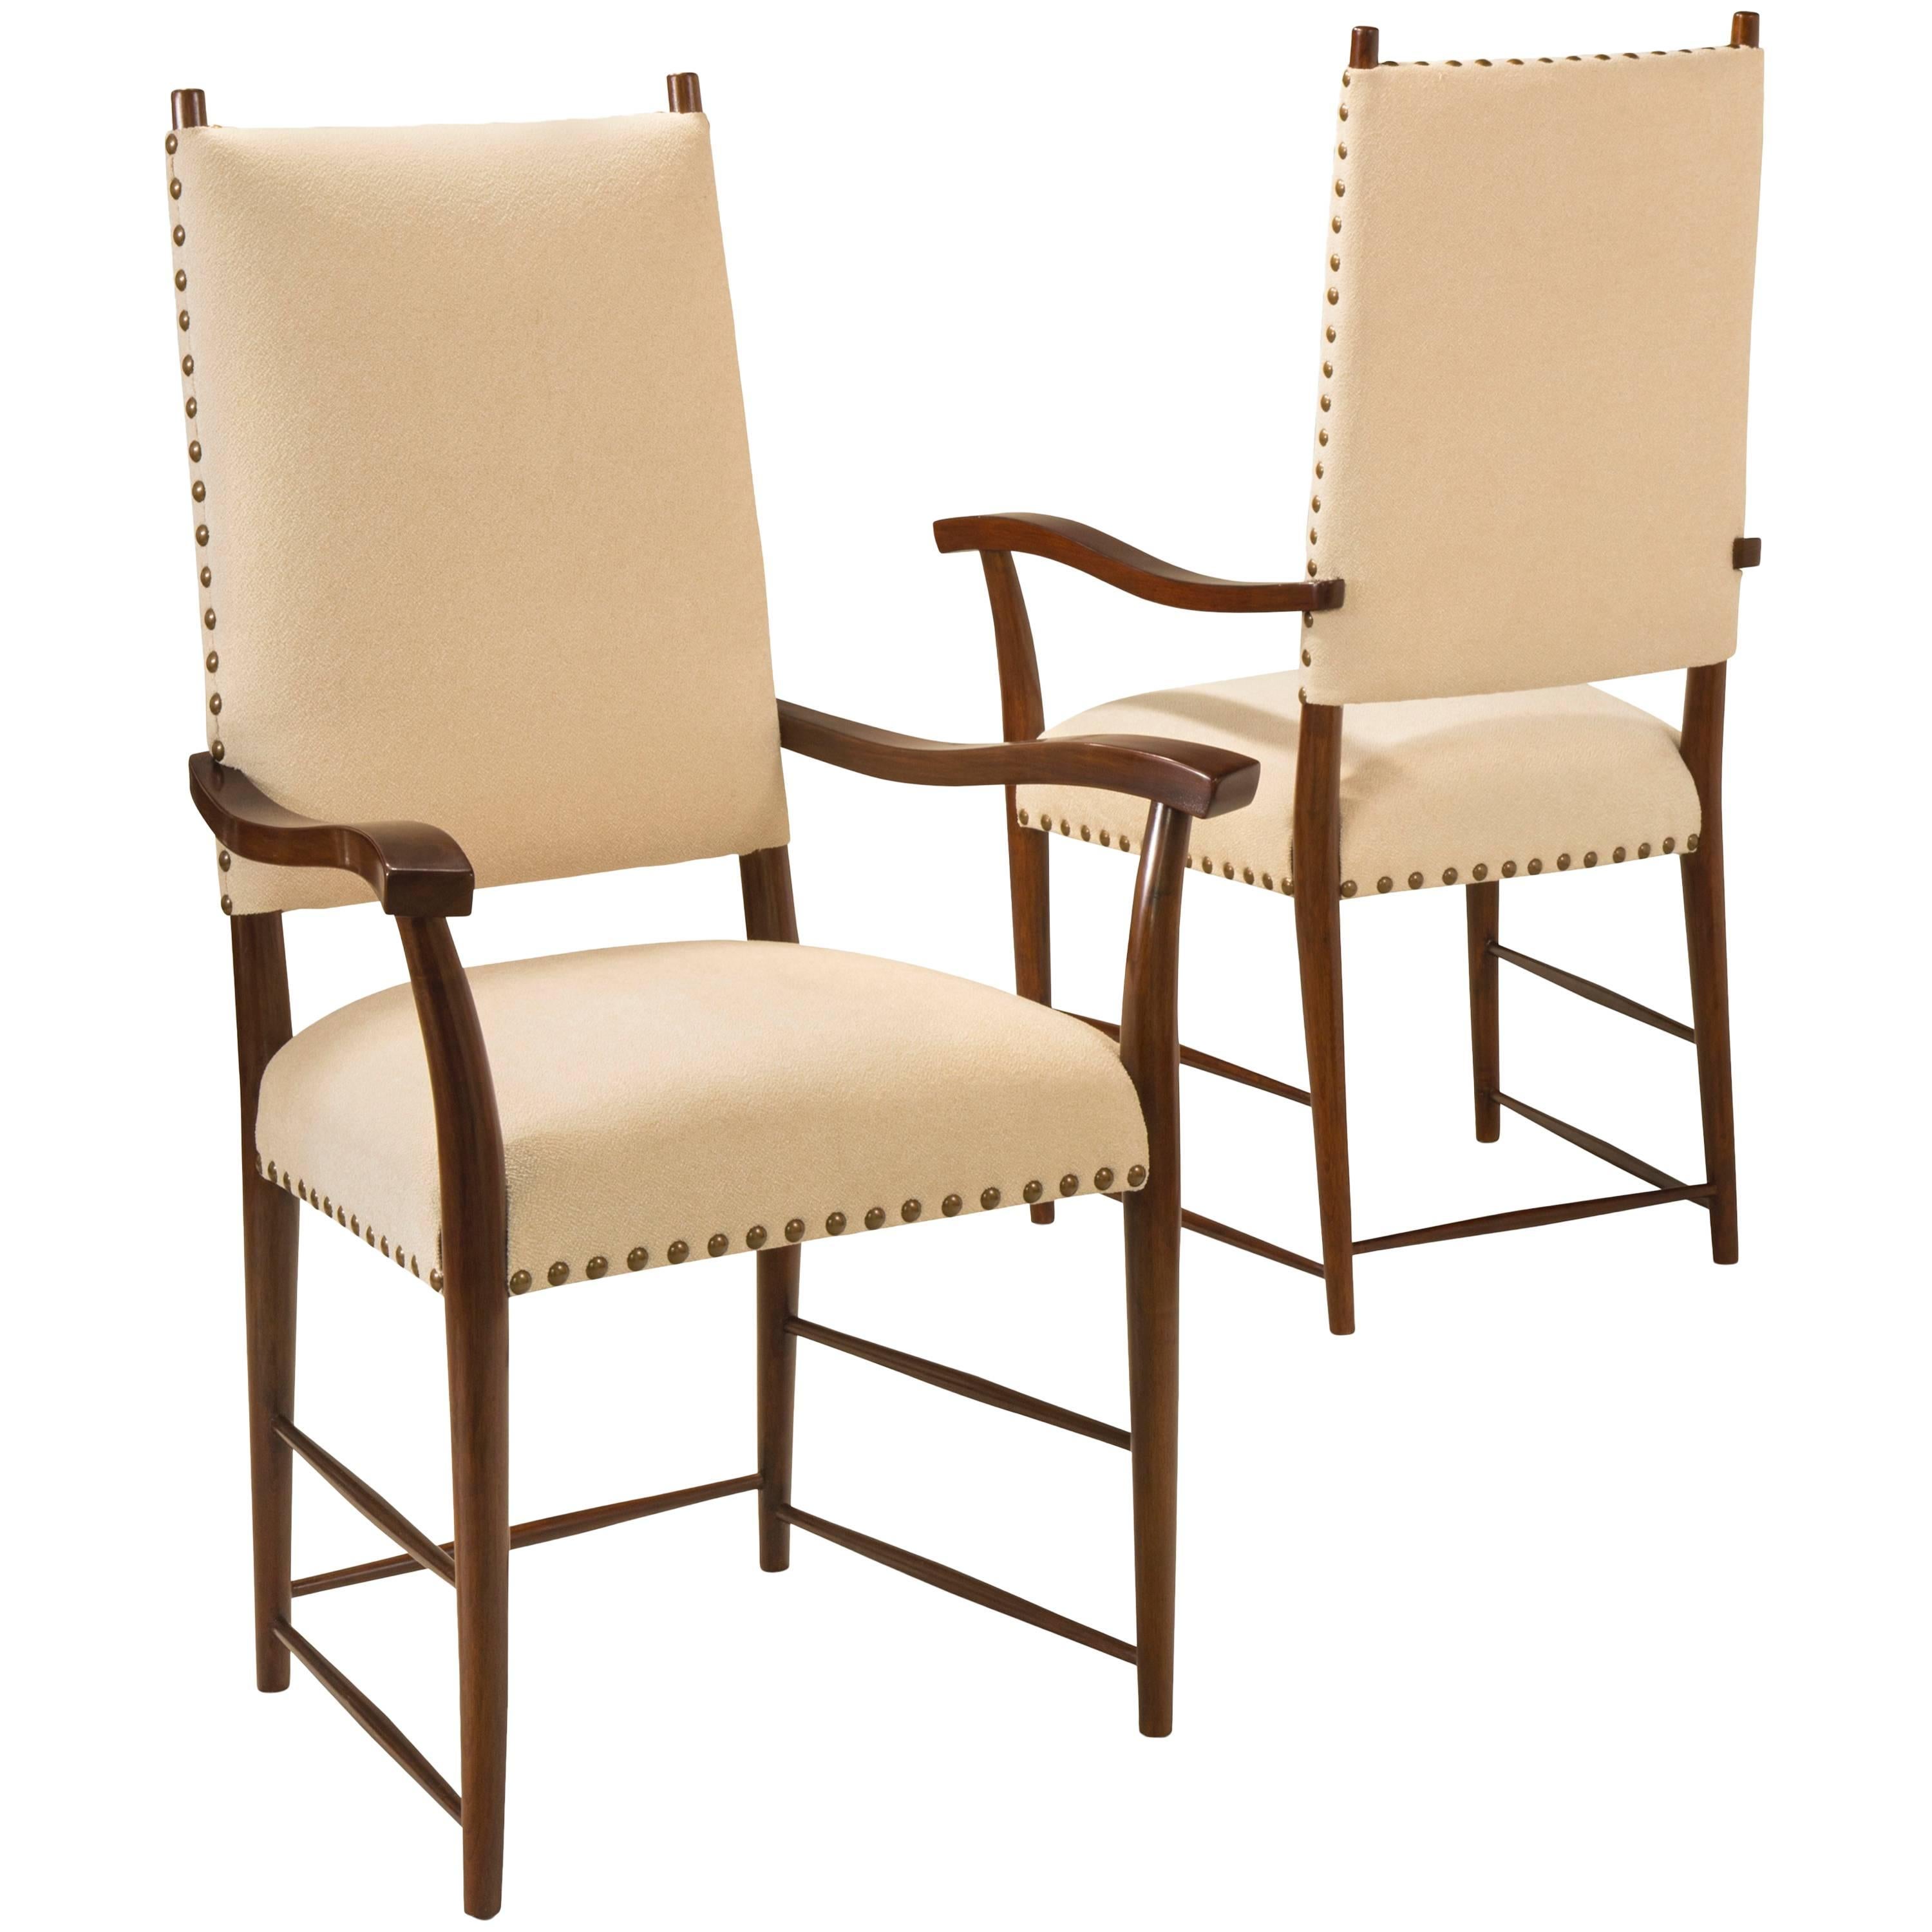 The tall upholstered back above a trapezoidal seat, raised on tapering legs joined by thin, elegant  stretchers. Each ribbon-curved armrest raised on gently bowed supports. Total of 10 side chairs and 2 armchairs available.  